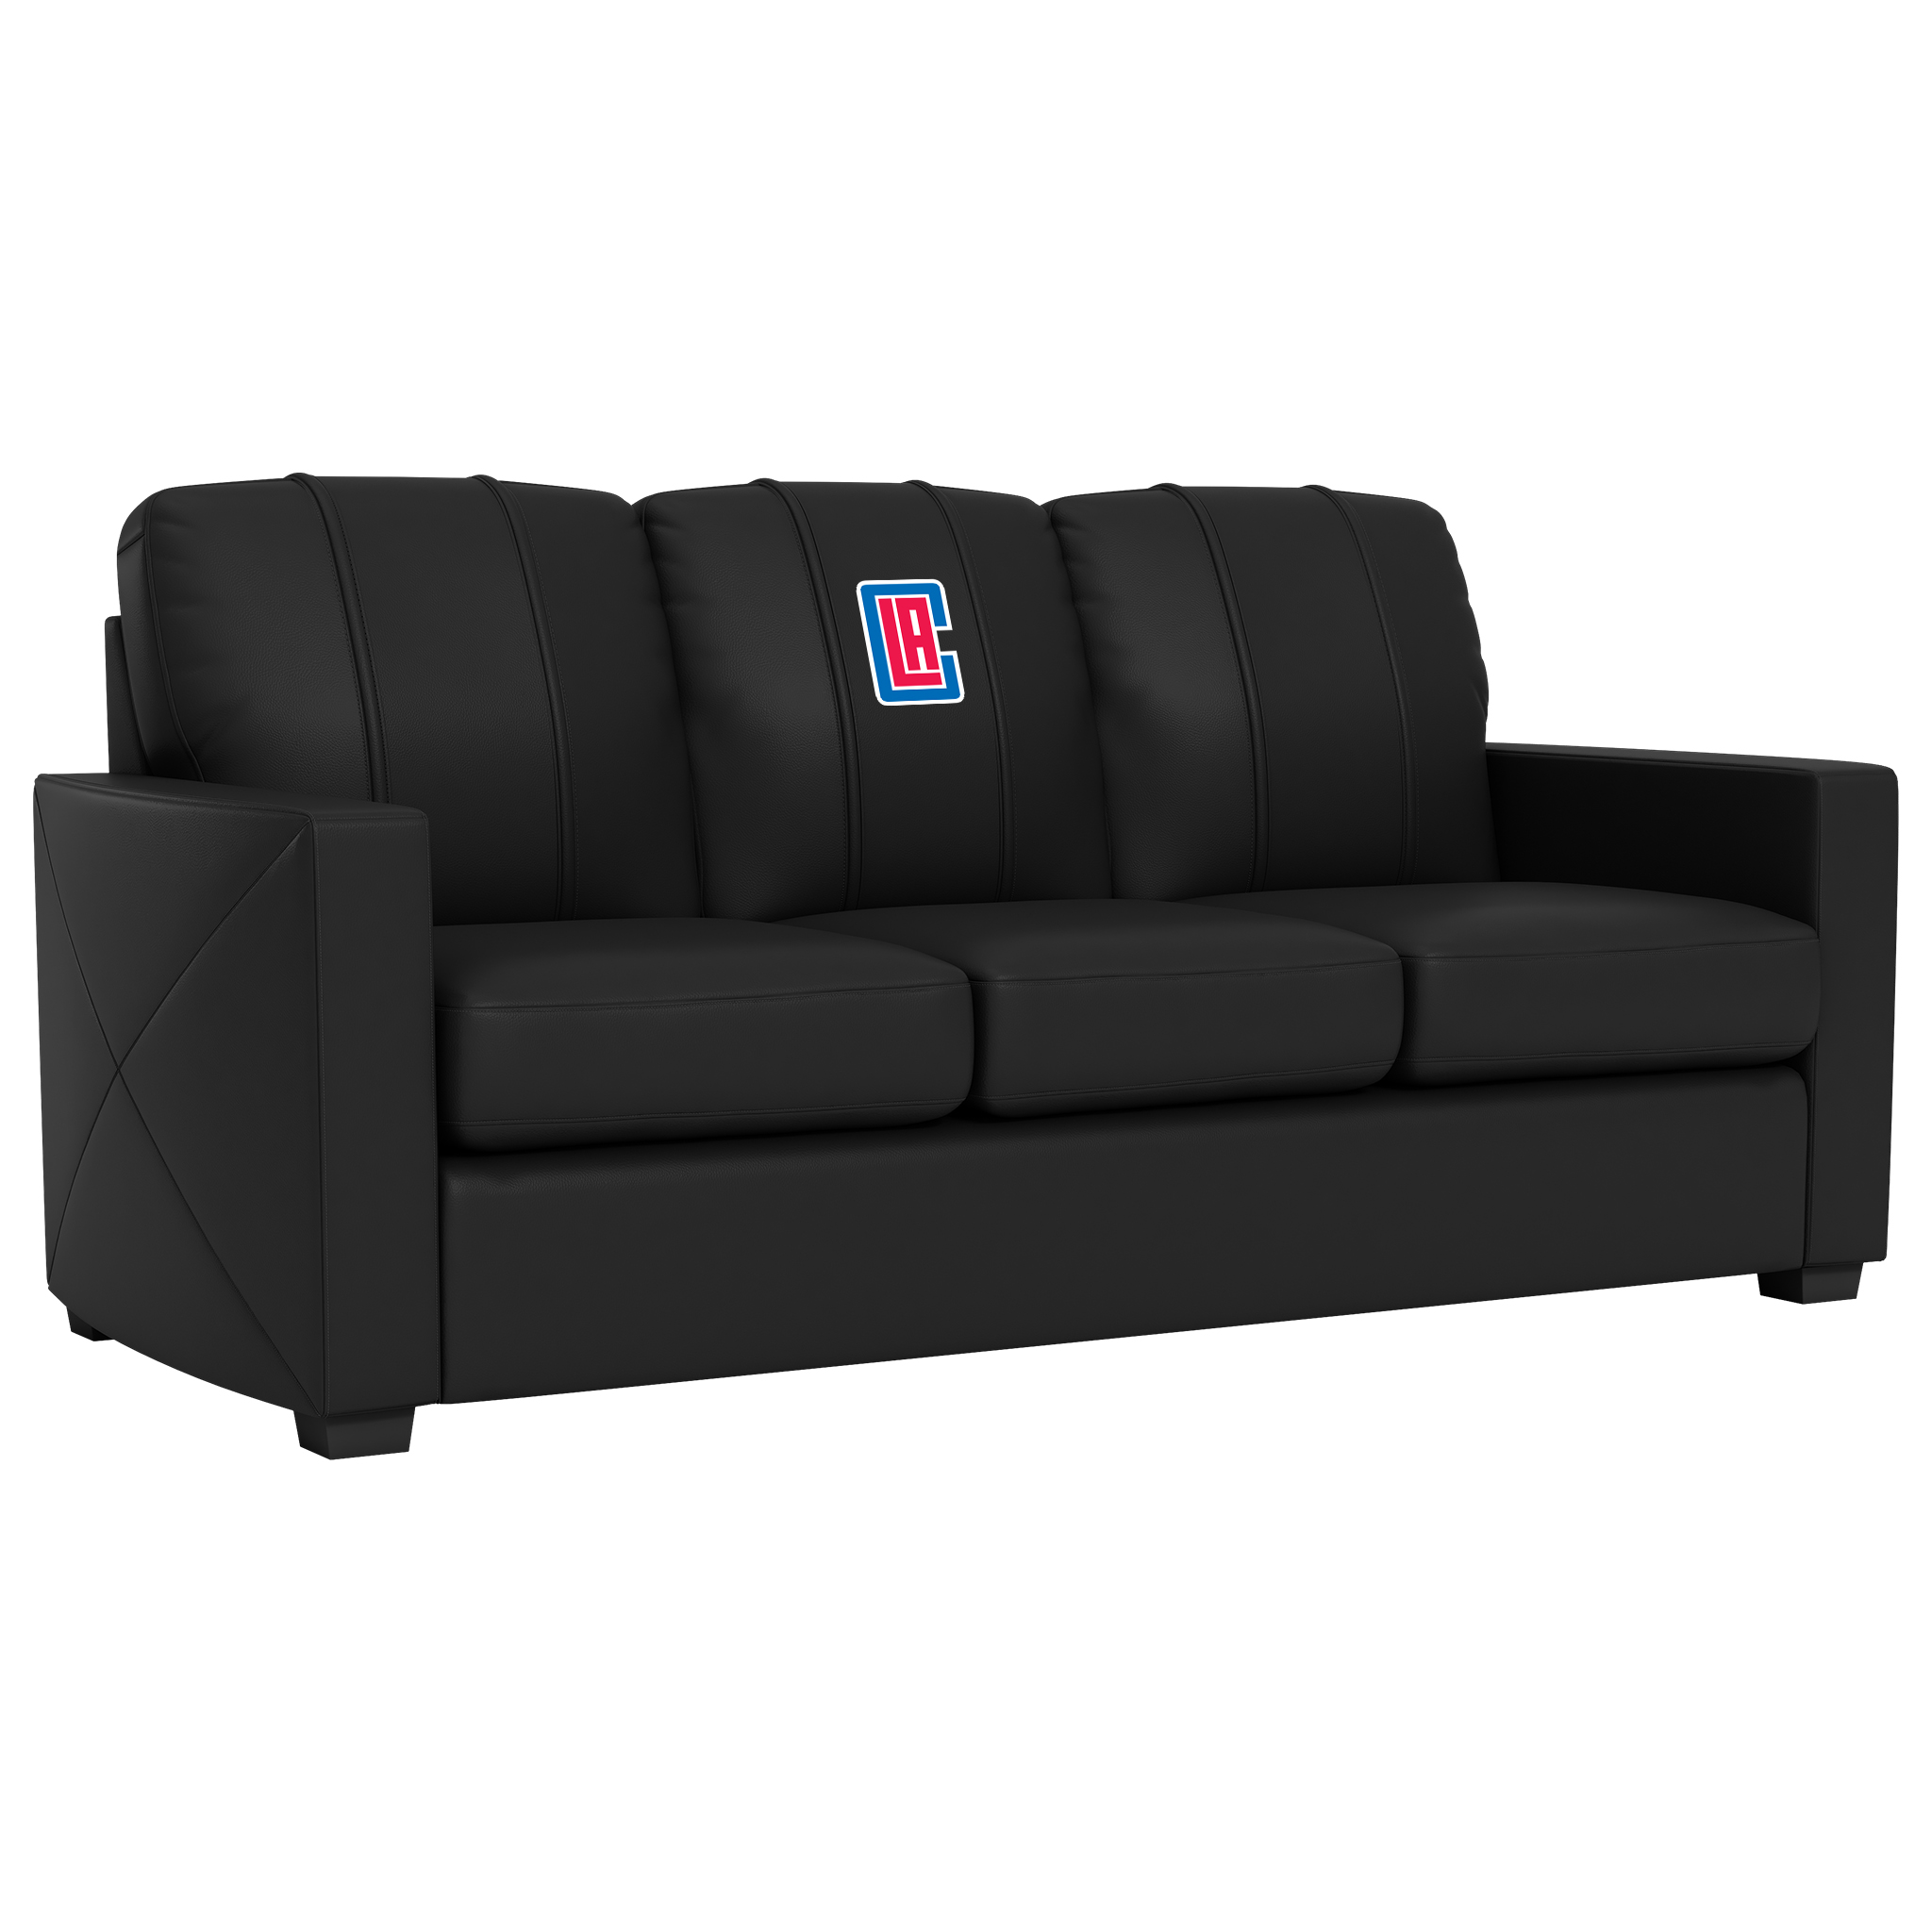 Los Angeles Clippers Silver Sofa with Los Angeles Clippers Secondary